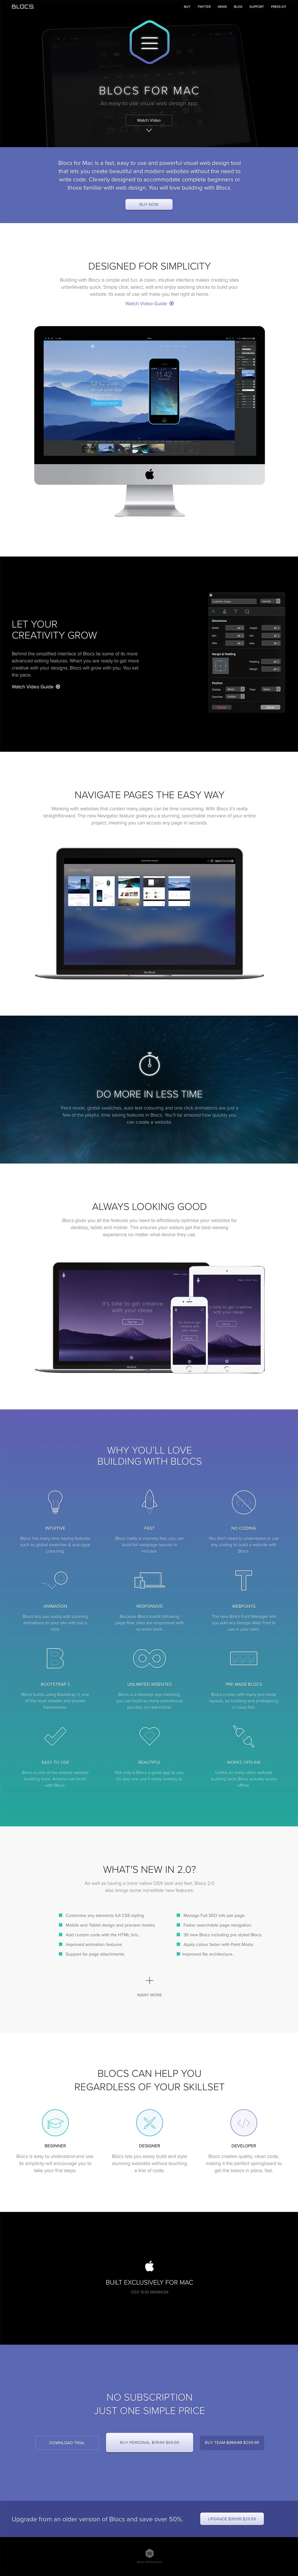 Blocs Landing Page Example: Blocs for Mac is a fast, easy to use and powerful visual web design tool that lets you create beautiful and modern websites without the need to write code. 